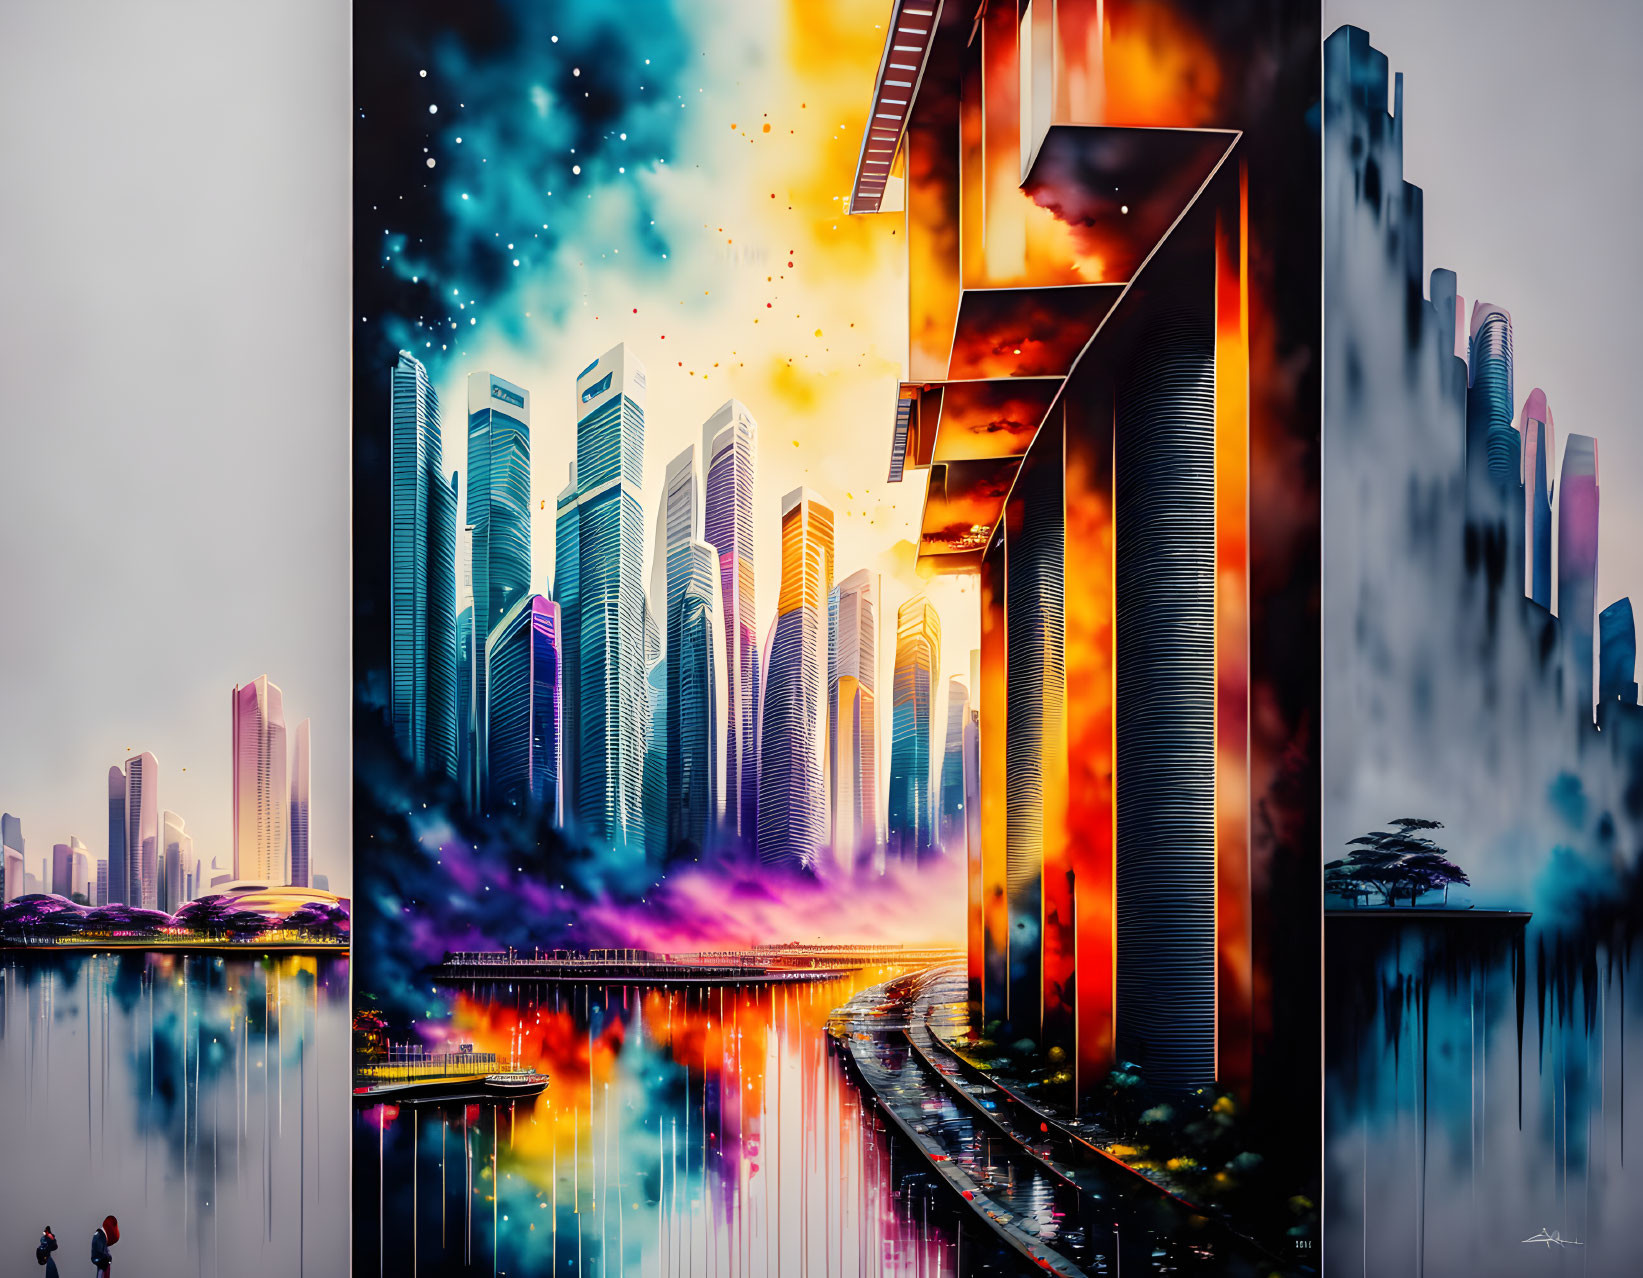 Futuristic cityscape with neon colors, starry sky, and giant numeral seven